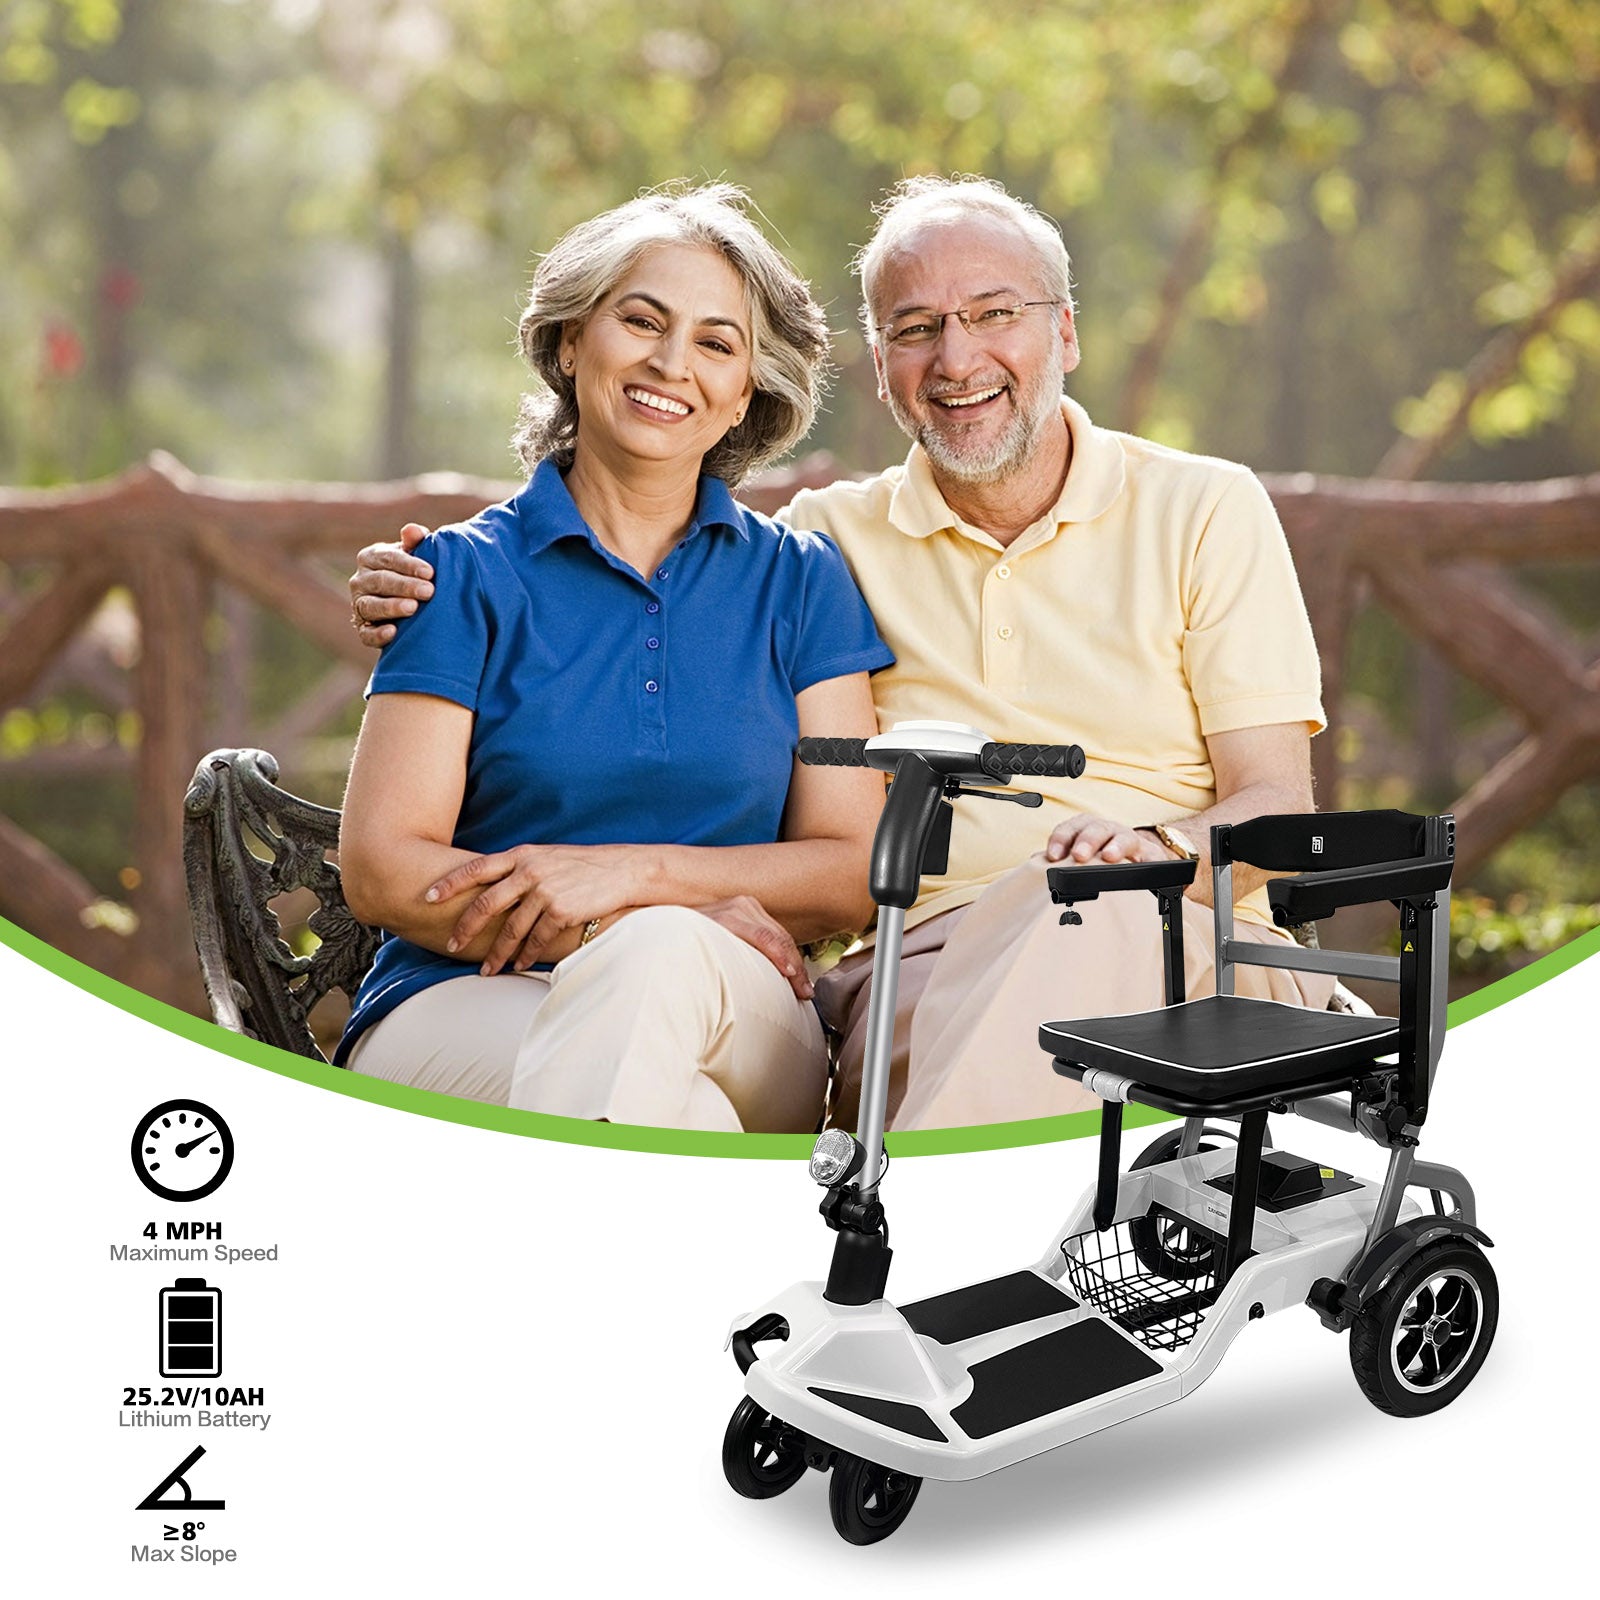 ZiiLIF-R3b 2023 Ultra Lightweight Folding Mobility Scooter for Travel Senior/Adult - Warranty Covered and Airlines Approved